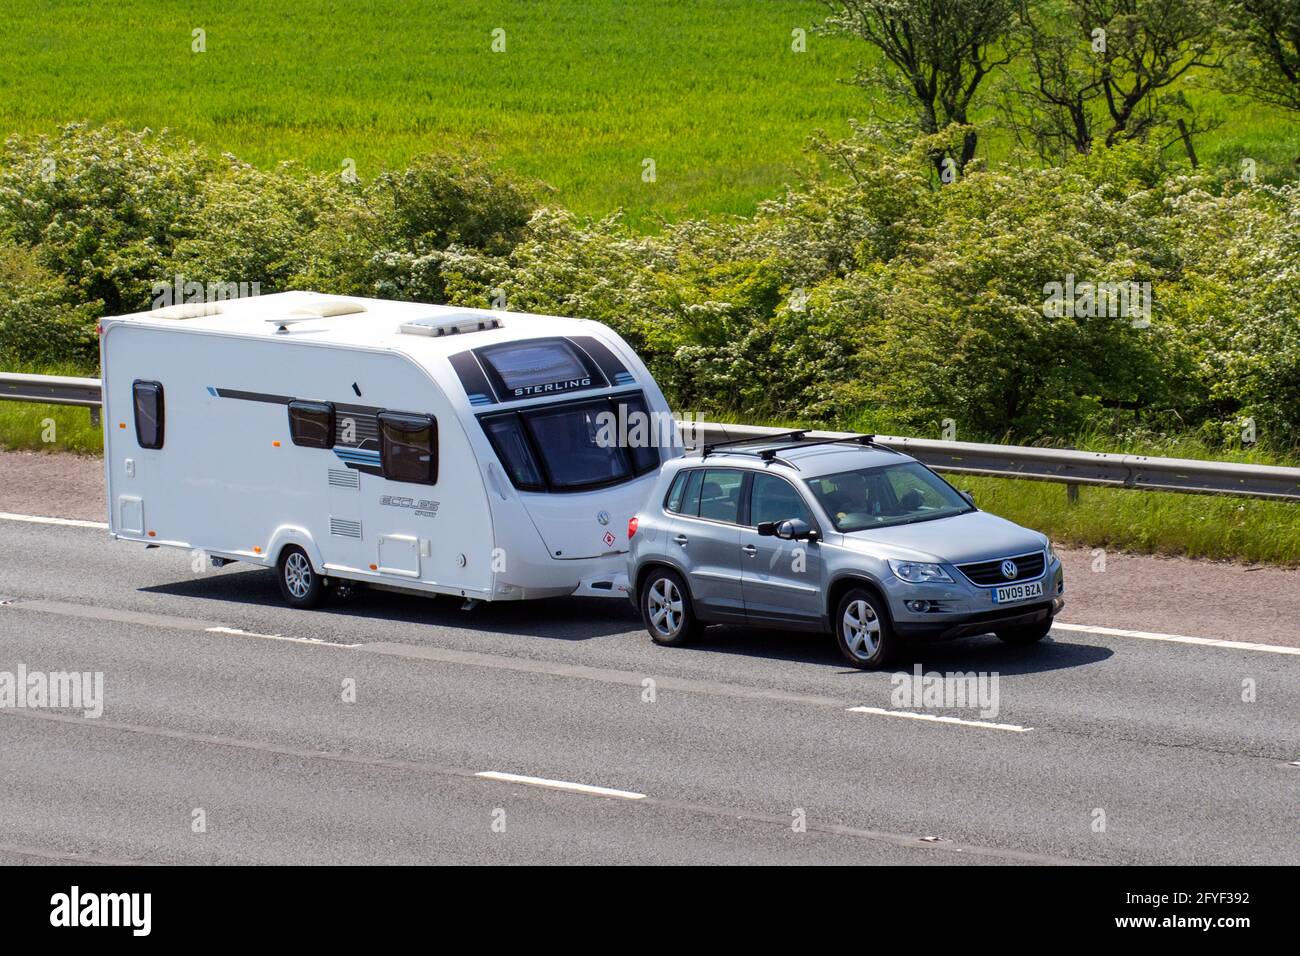 2009 silver VW Volkswagan Tiguan Escape Tdi 140 1968cc diesel SUV towing Sterling Eccles Sport caravan campervans on Britain's roads, RV leisure vehicle, family holidays, caravanette vacations, Touring caravan holiday, van conversions, Vanagon autohome, life on the road,  auto-sleeper Stock Photo